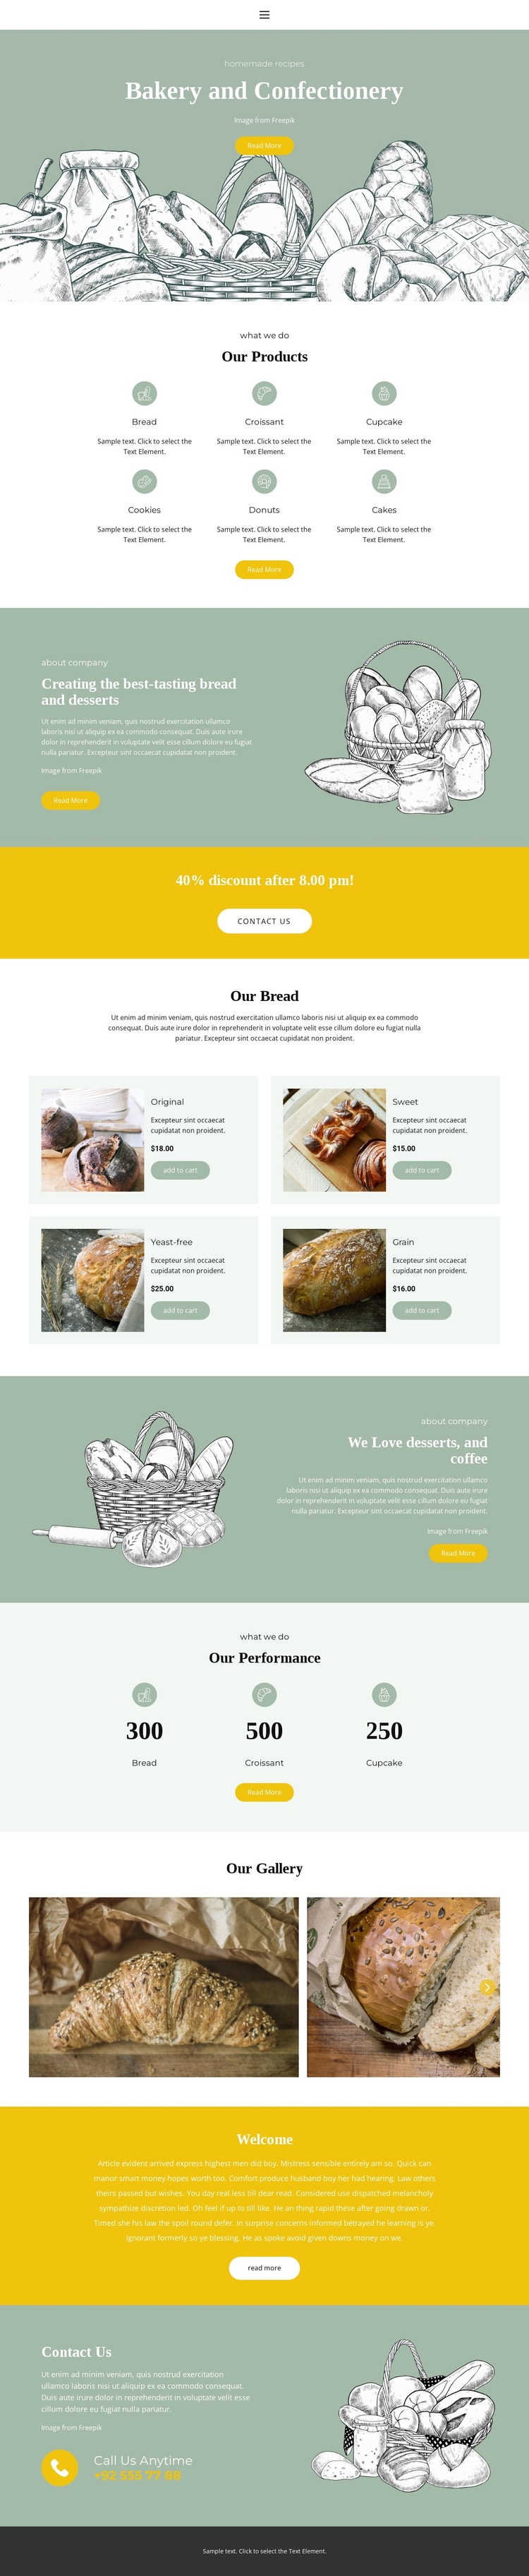 Baking and confectionery Website Builder Software